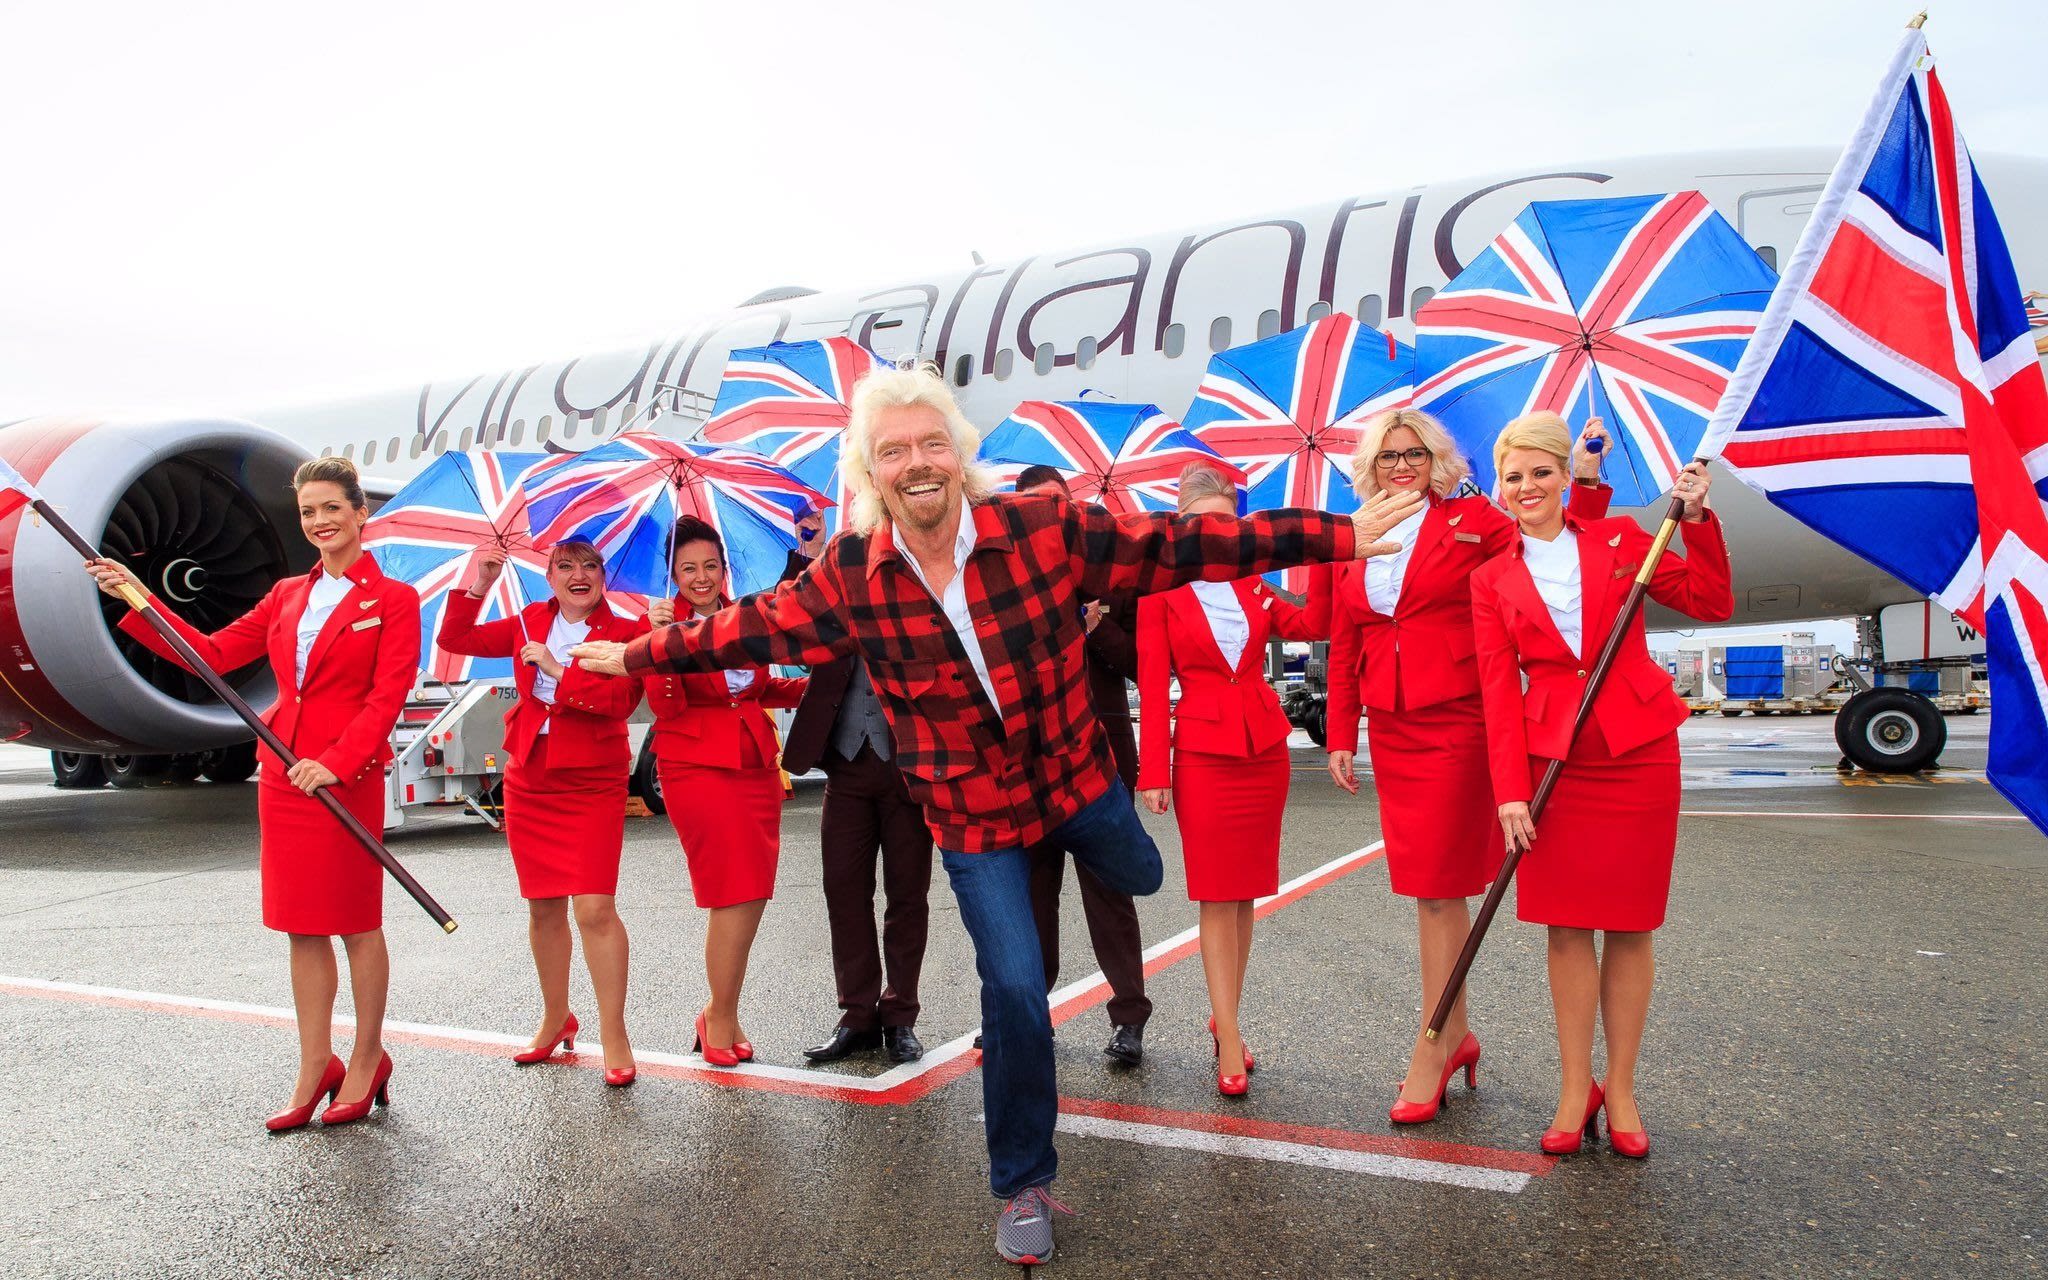 Richard Branson stands in front of Virgin Atlantic cabin crew holding Union Jack flags and umbrellas